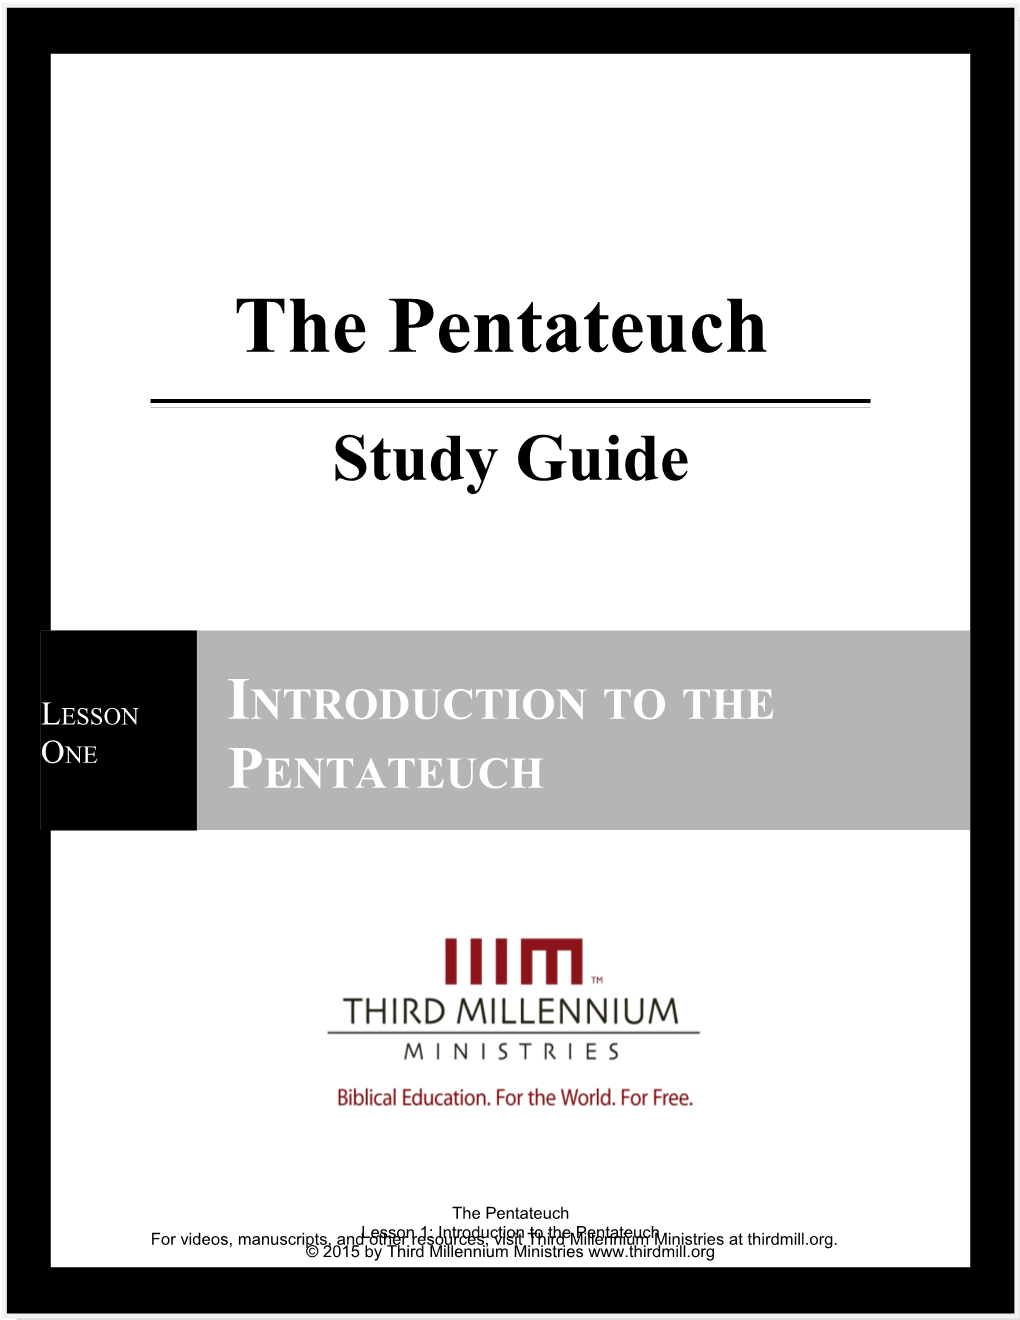 Lesson 1: Introduction to the Pentateuch